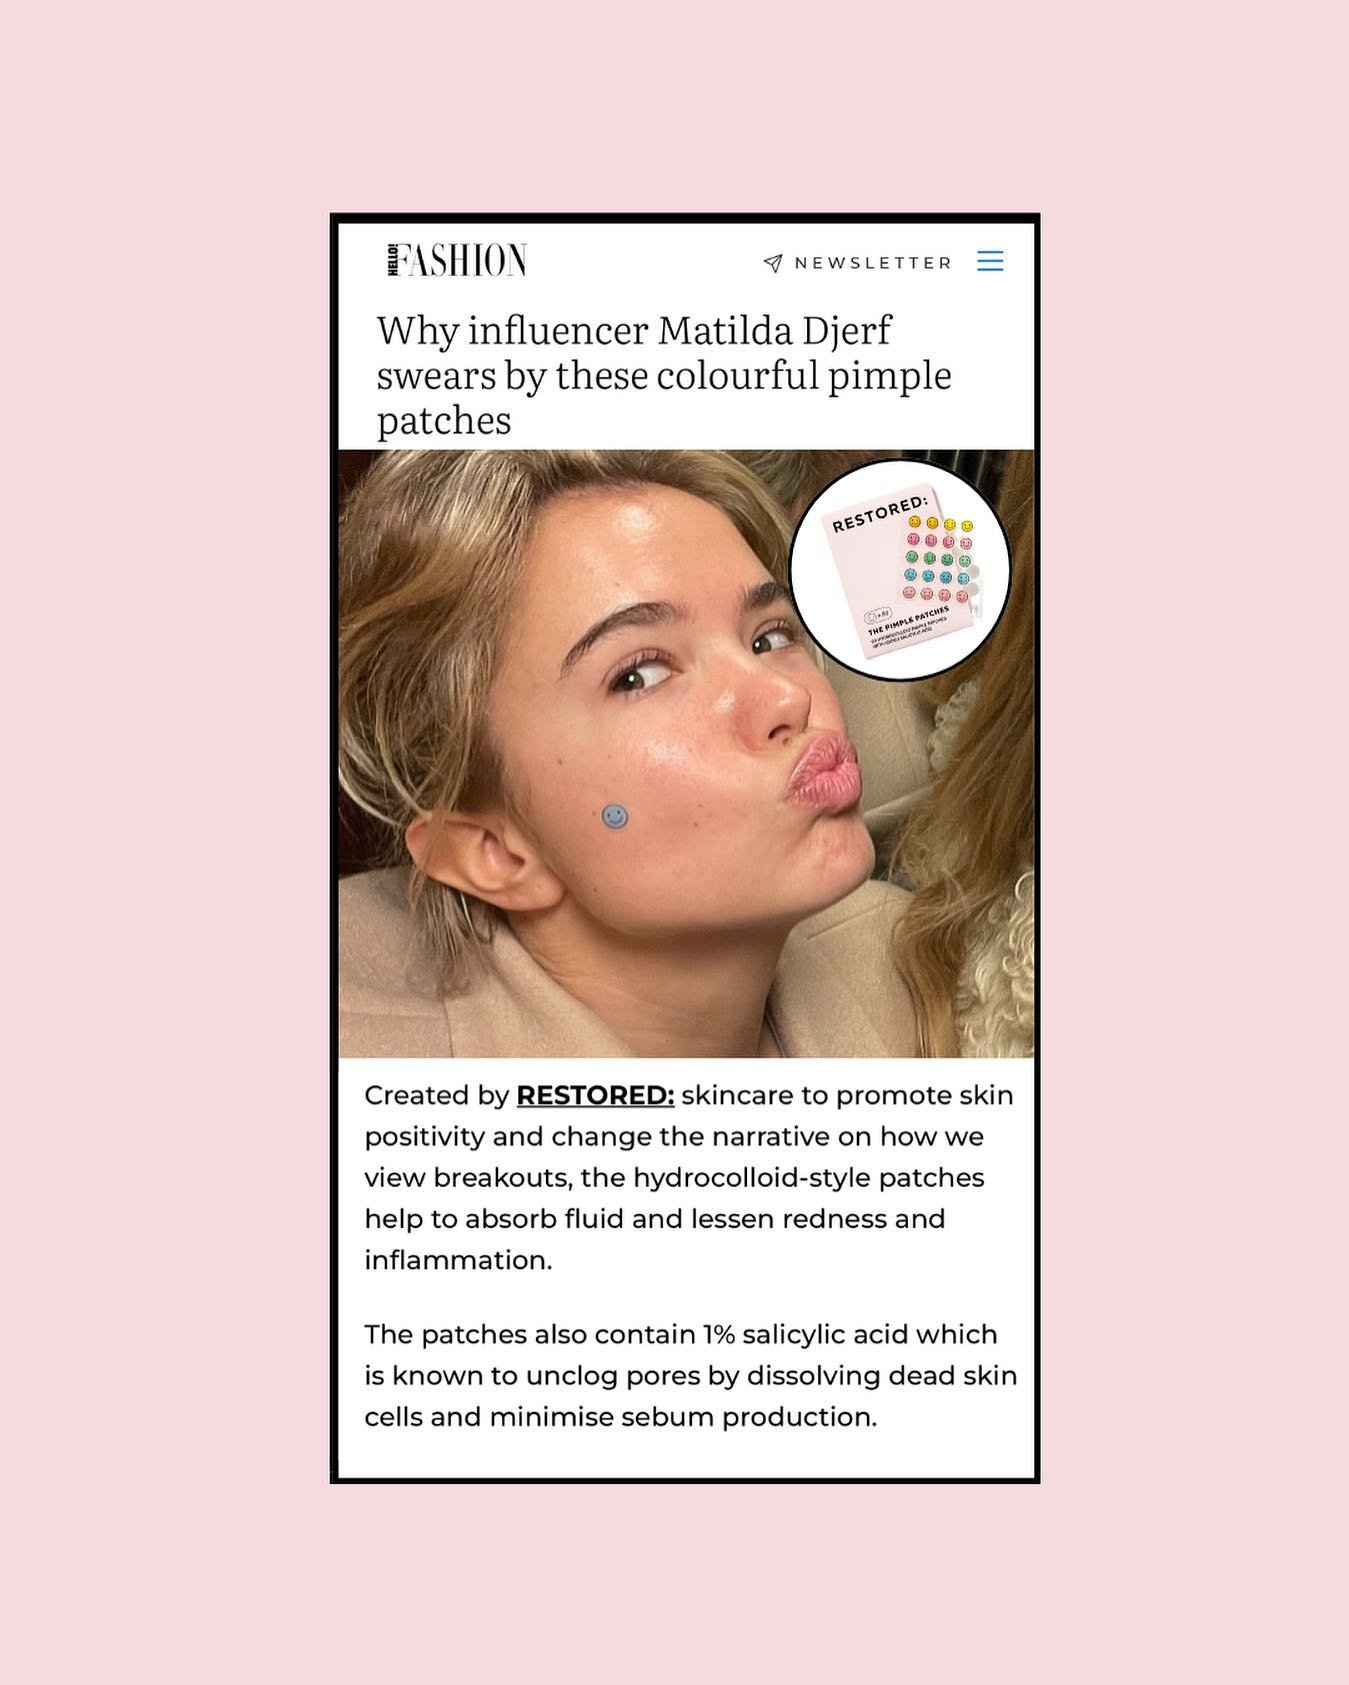 Our pimple patches loved by our dream girl @matildadjerf 🥹
See our latest feature in Hello! Magazine 💗